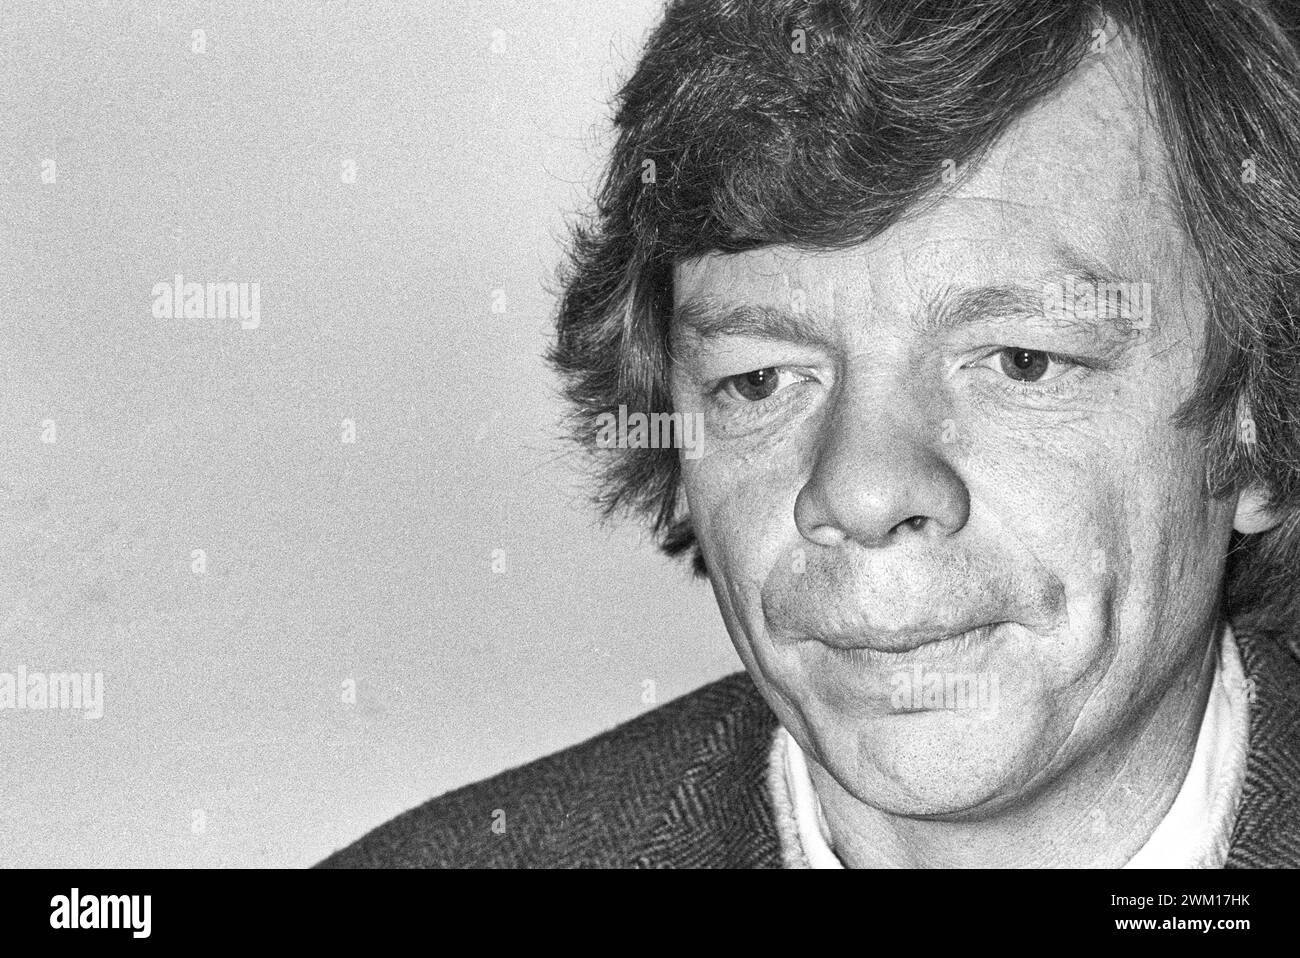 3831791 Richard Caldwell; (add.info.: Rome, about 1980. American psychologist and psychoanalist Richard Caldwell / Roma, 1980 circa. Richard Caldwell, psicologo e psicoanalista); © Marcello Mencarini. All rights reserved 2024. Stock Photo